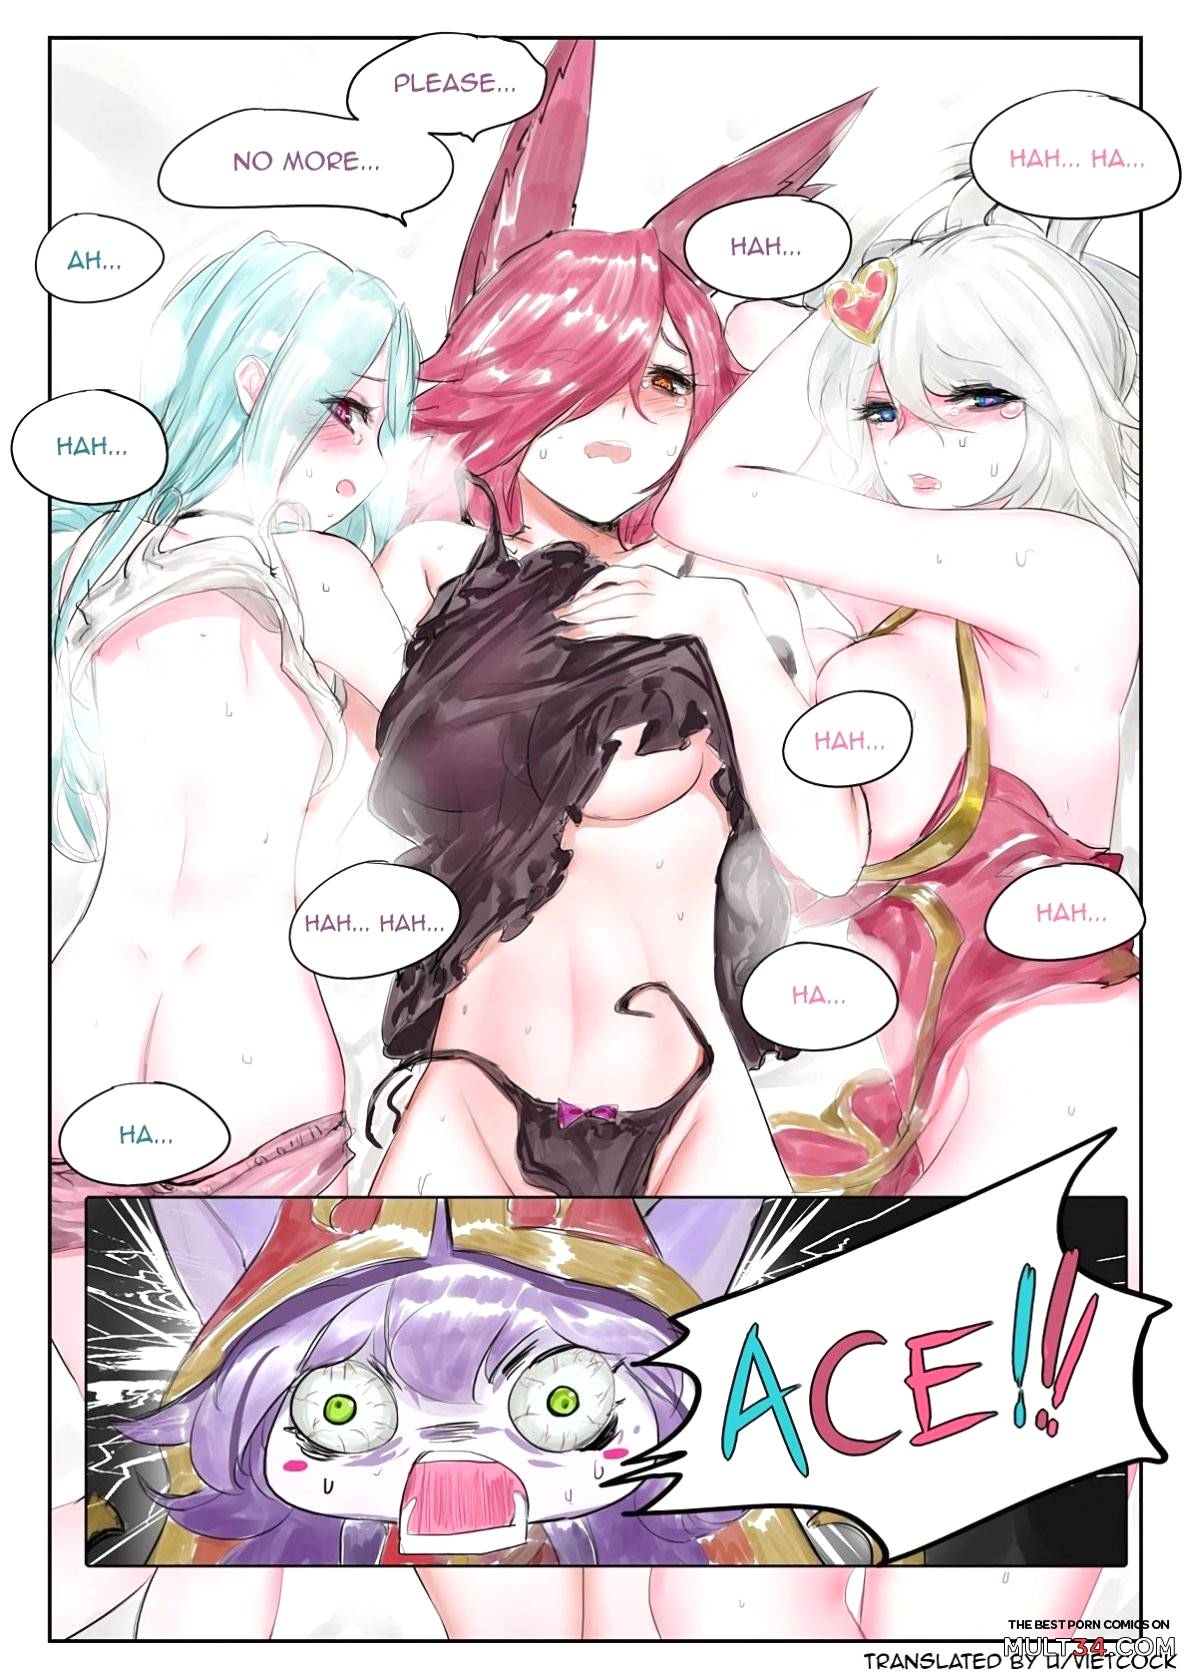 ADC&ACE page 24